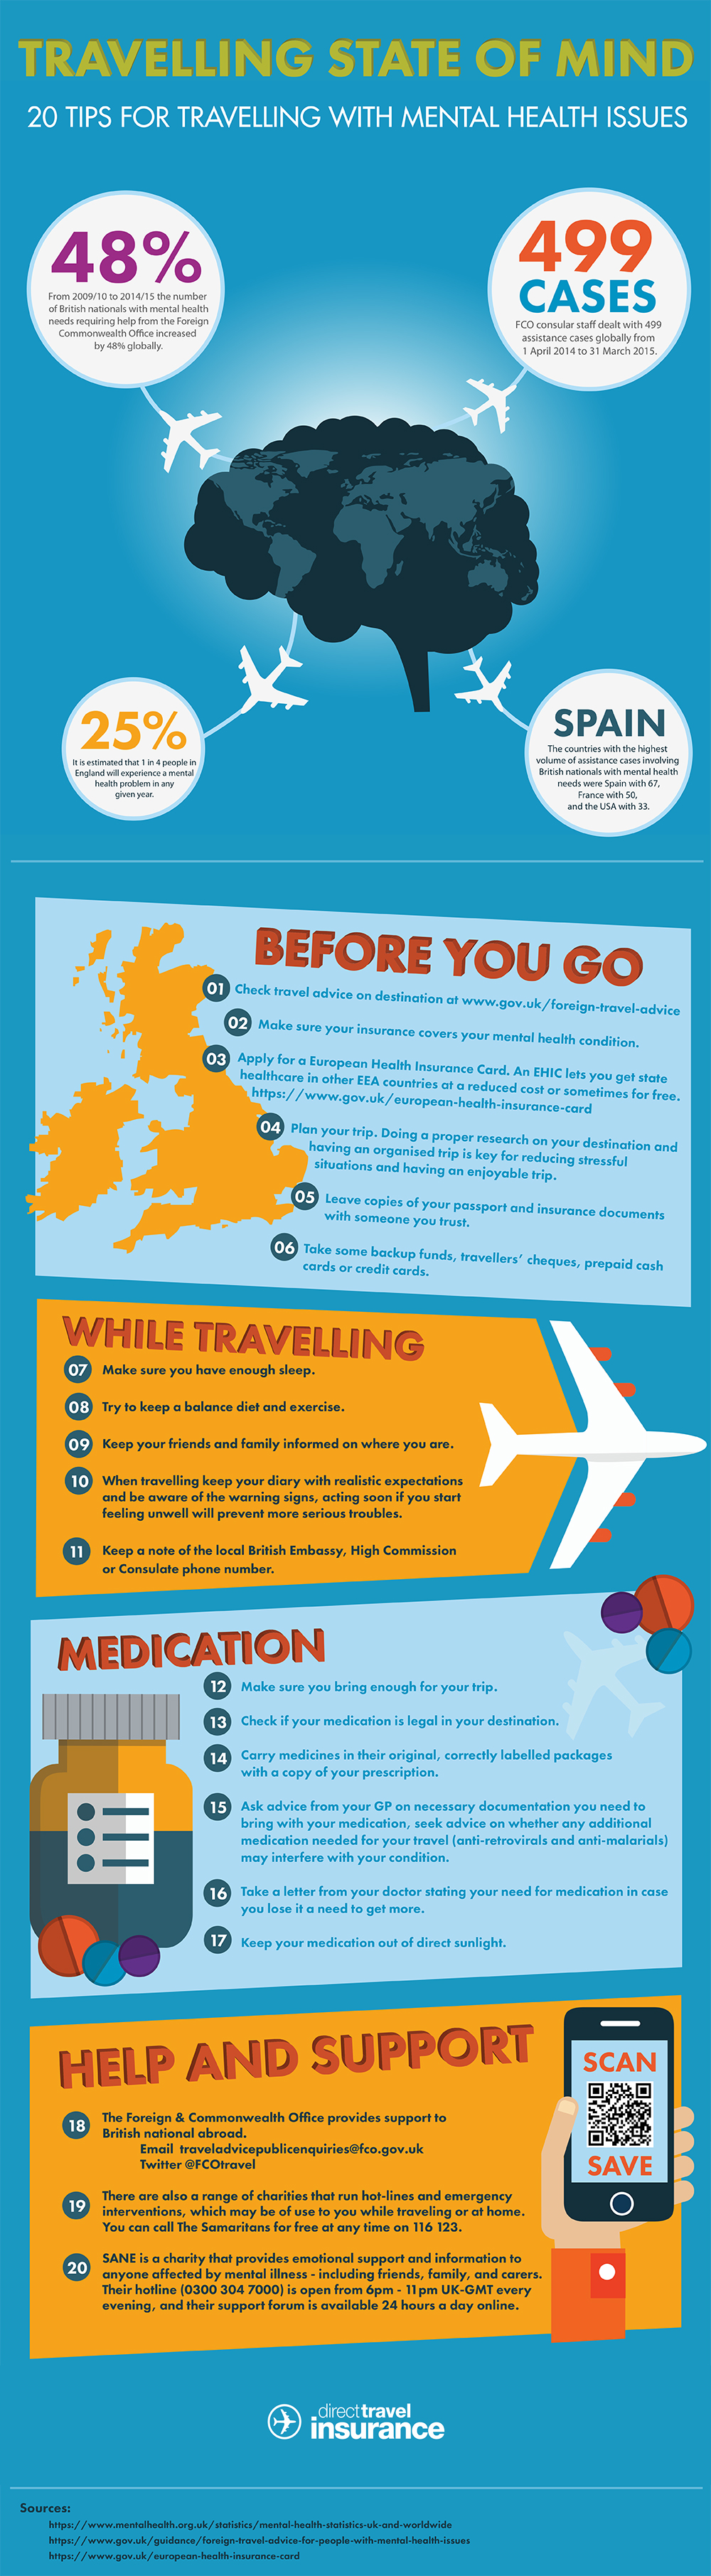 dti-infographic-travelling-state-of-mind